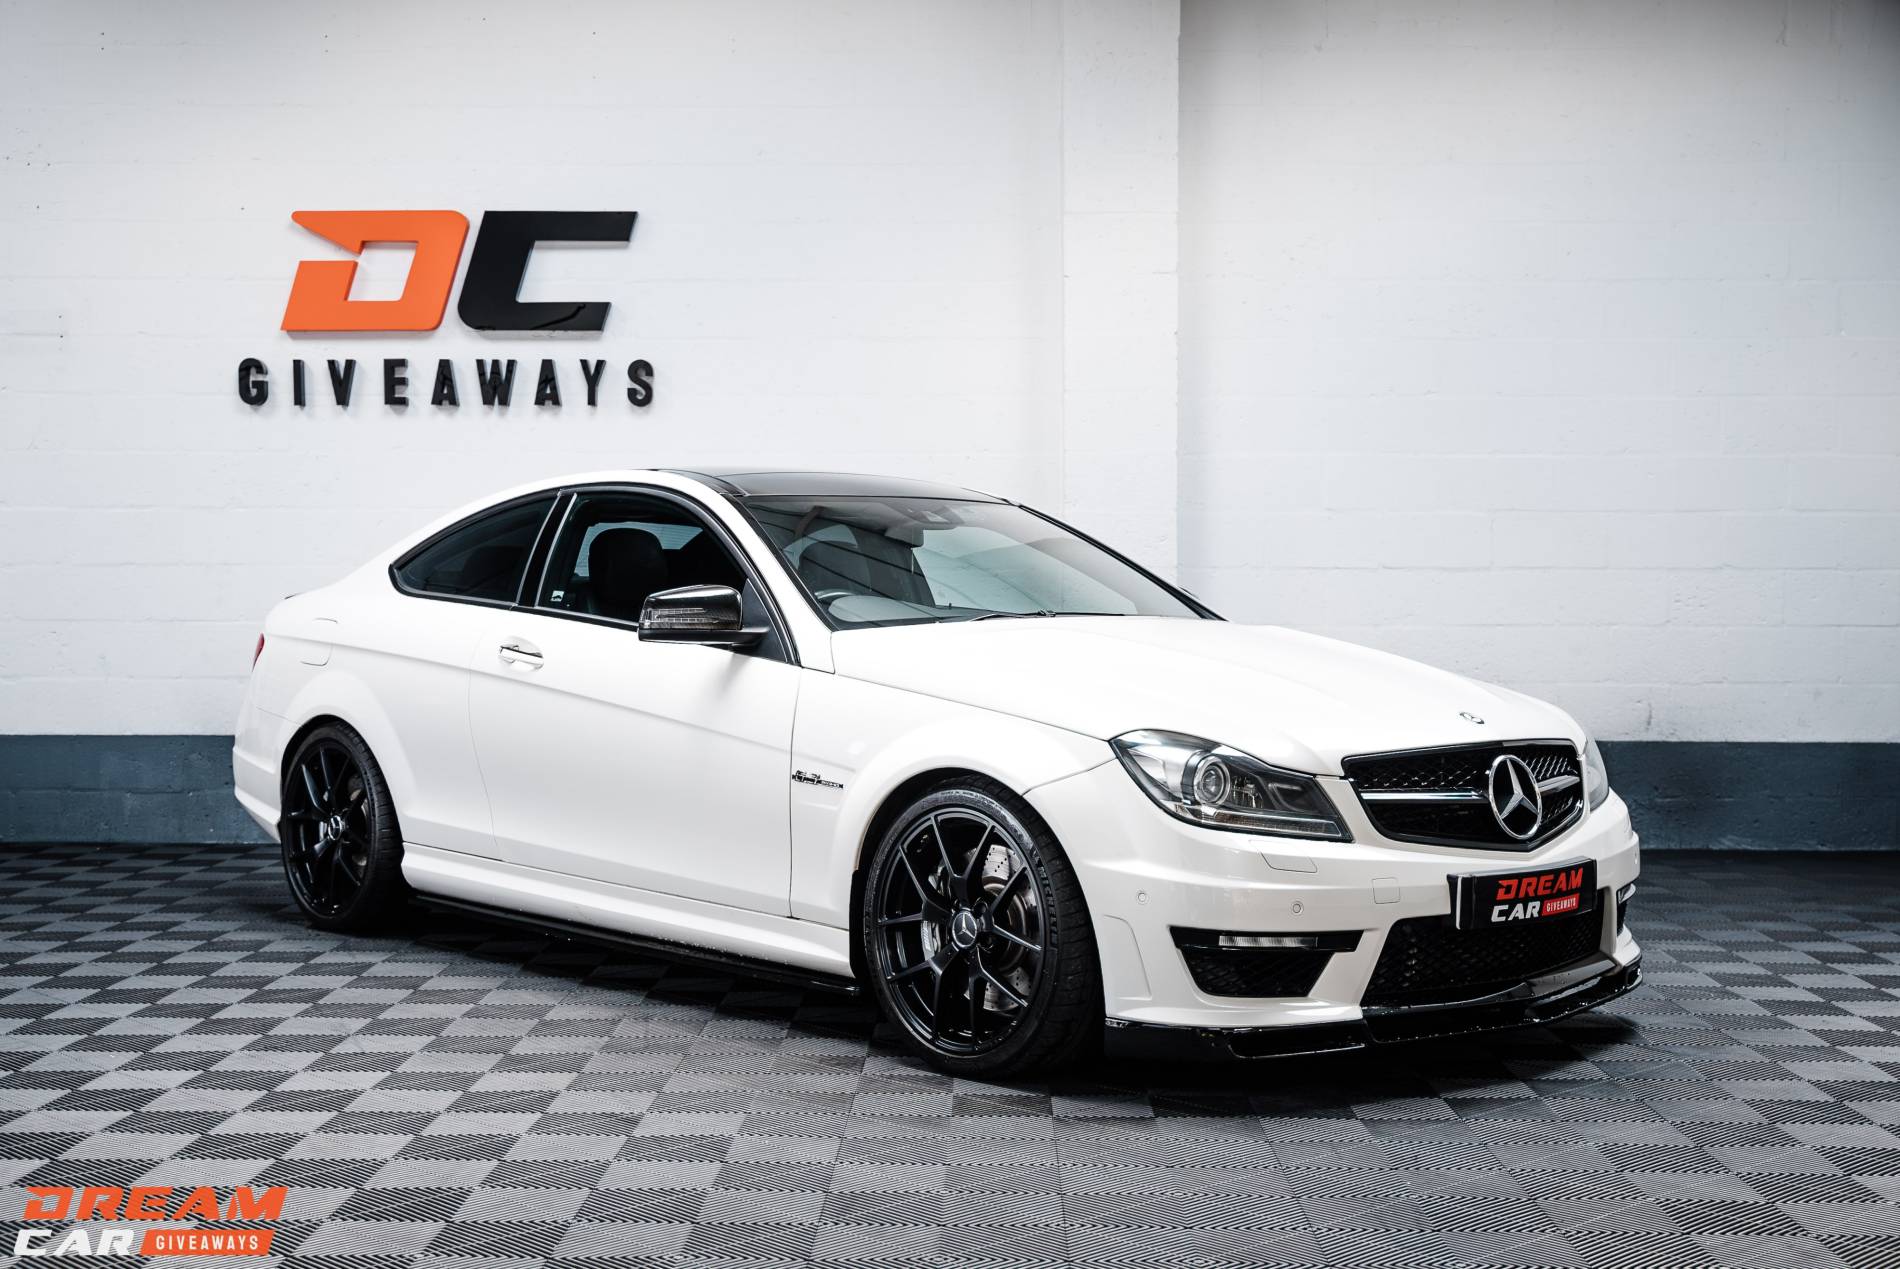 700HP Mercedes-Benz C63 AMG ESS Supercharged & £1,000 or £26,000 Tax Free